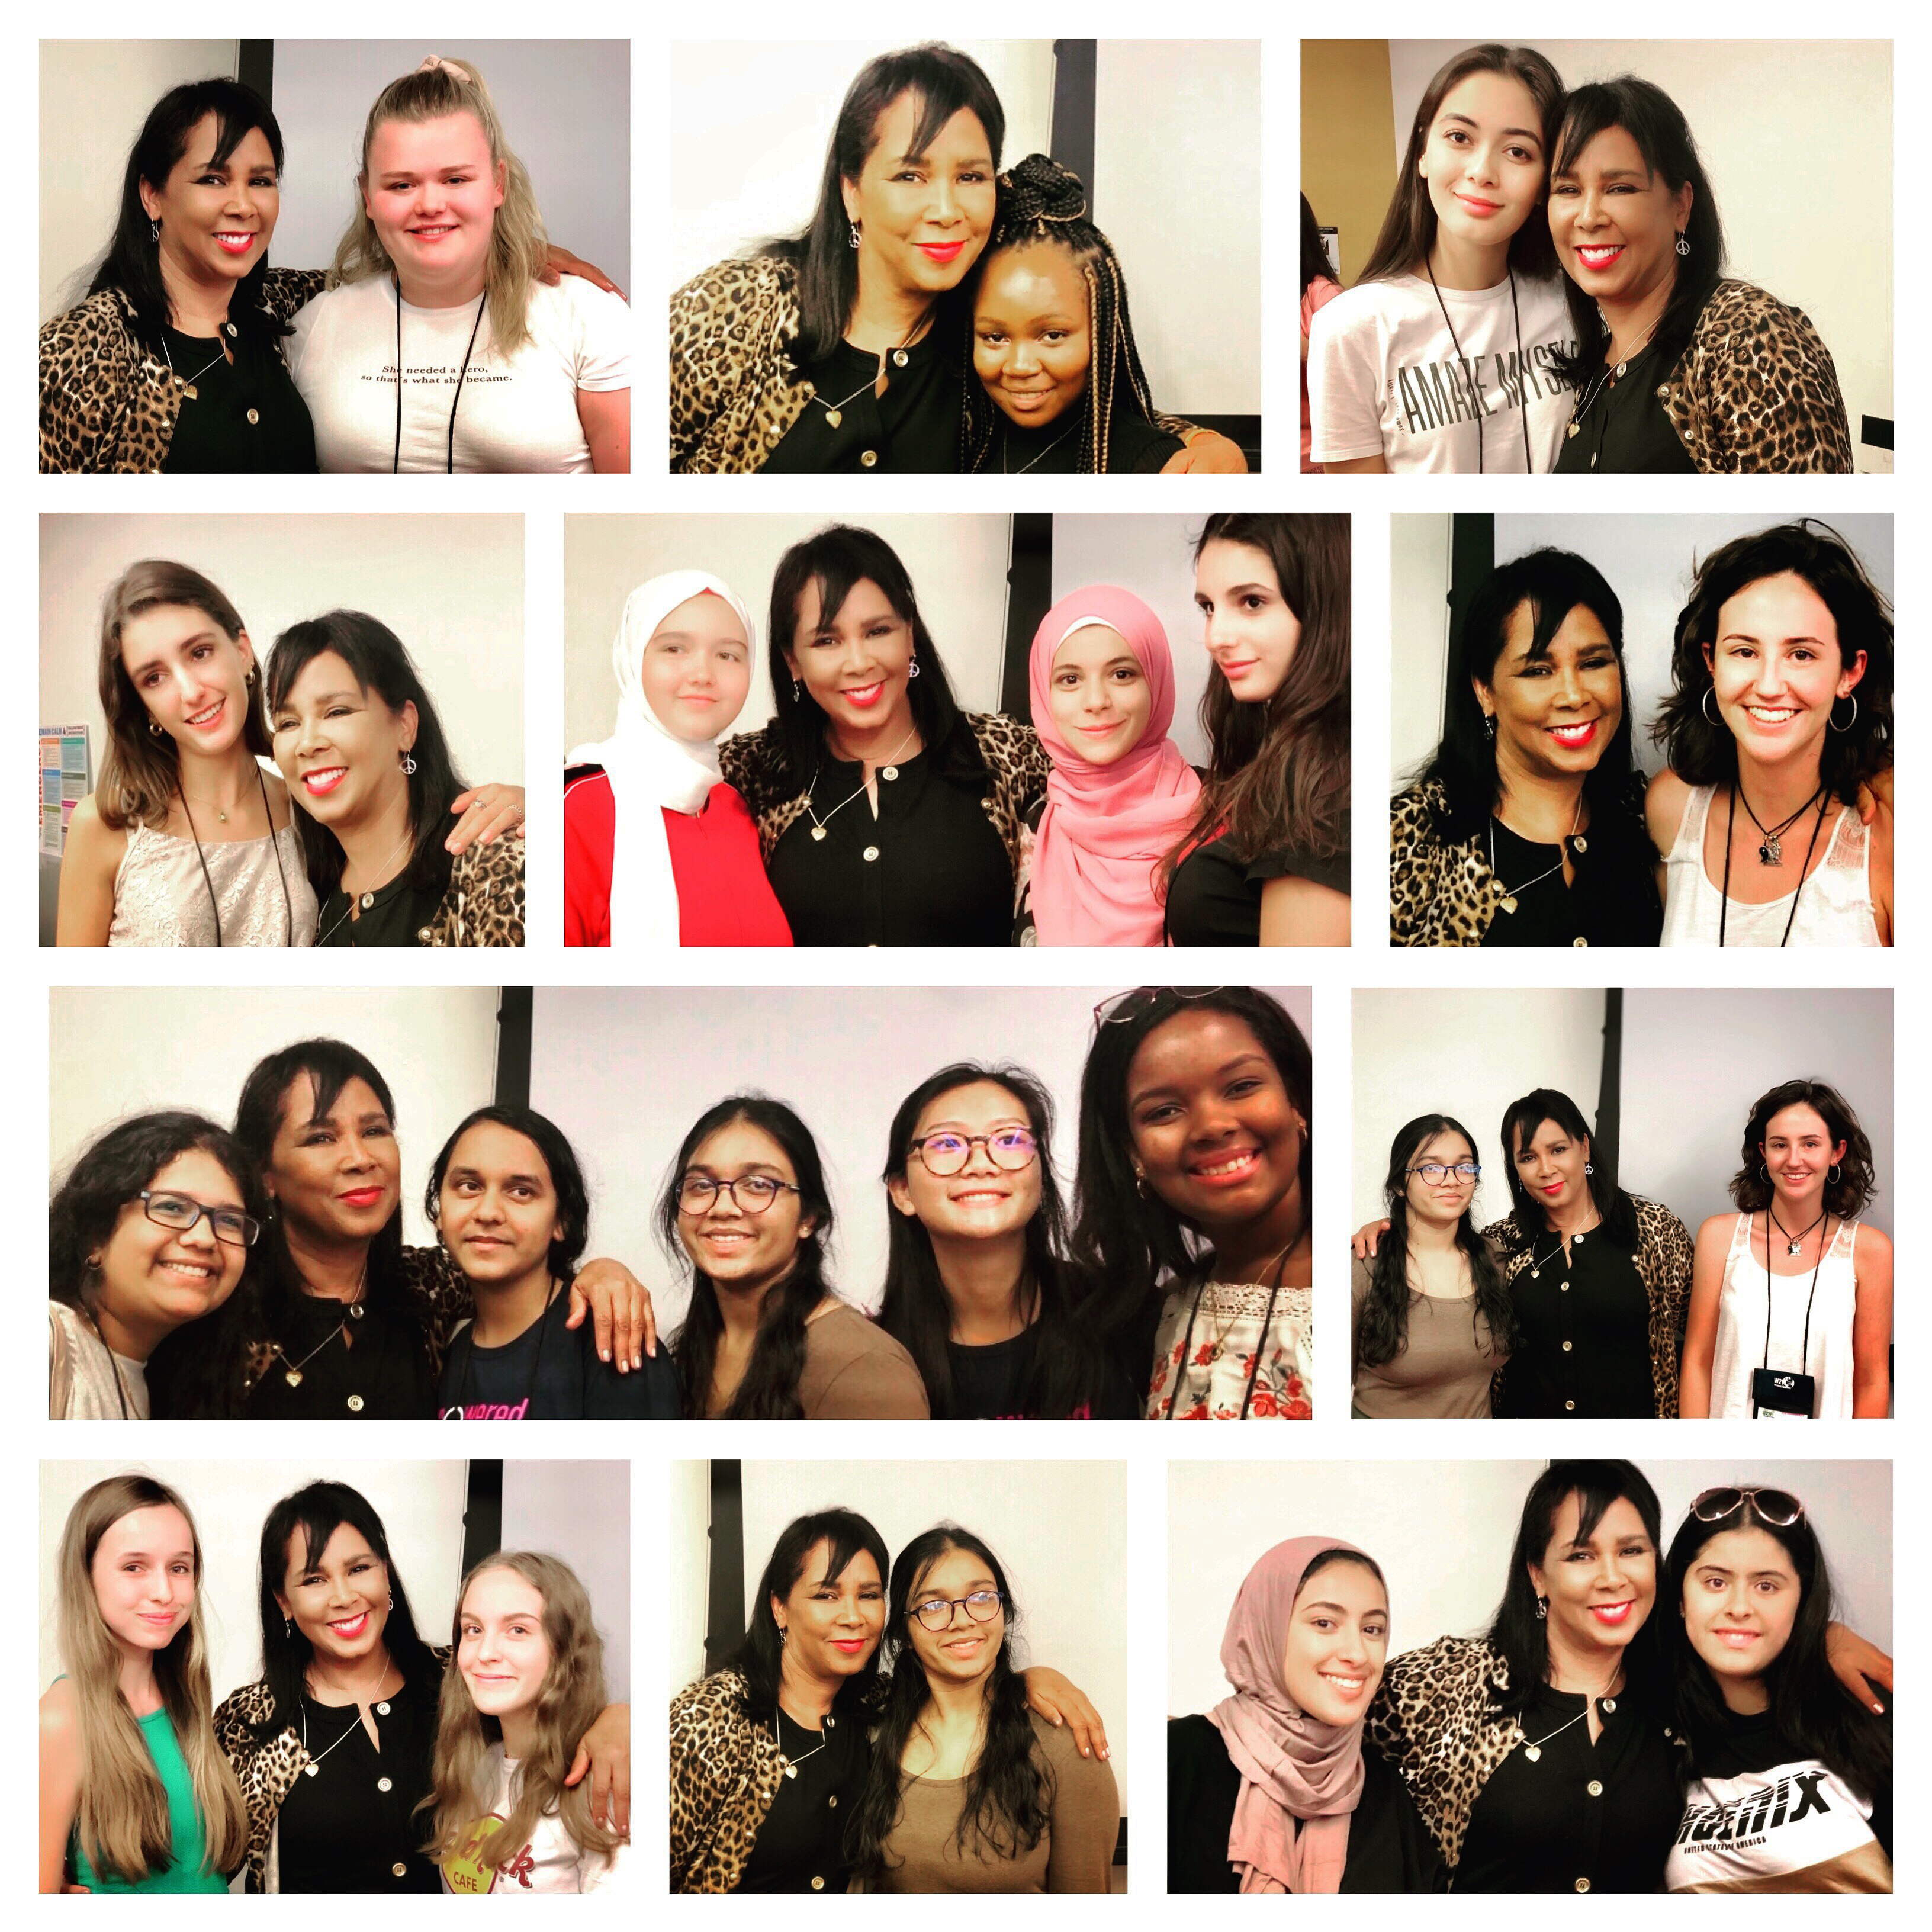 Cheryl Jackson with different people at the 2019 Women2Women Conference 